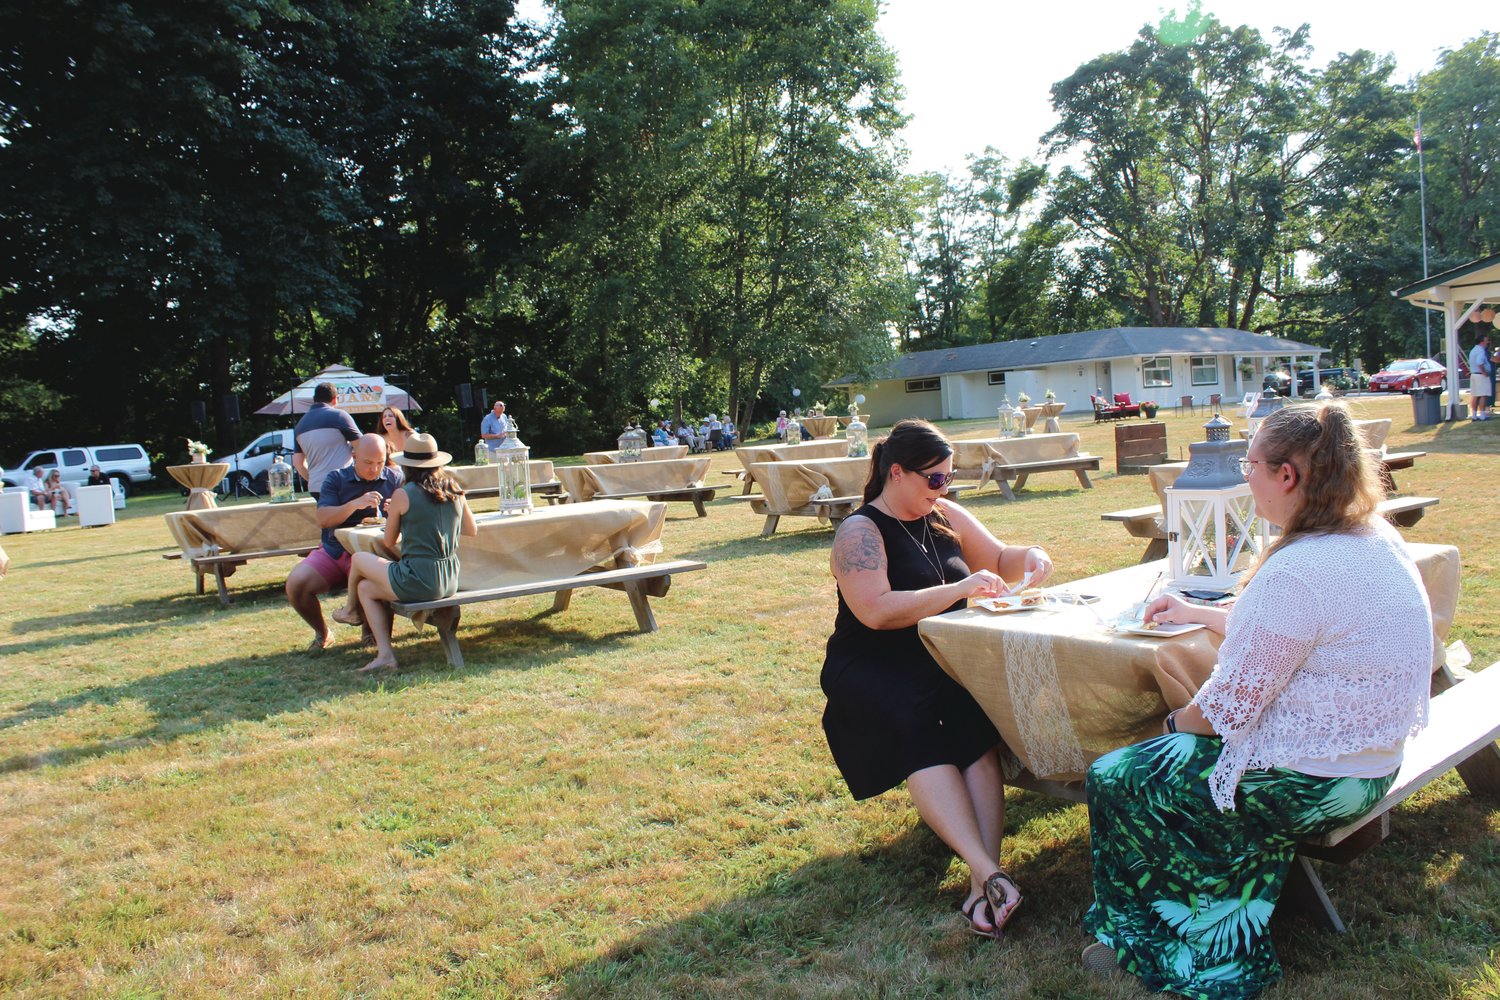 Timi Johnson and Rebecca Towner, of Twin Transit, enjoy some food at one of several picnic tables at the Chehalis Foundation's Party in the Park fundraiser. Planning committee members planned the event with COVID safety in mind, opting for an outdoor event with socially distanced seating.